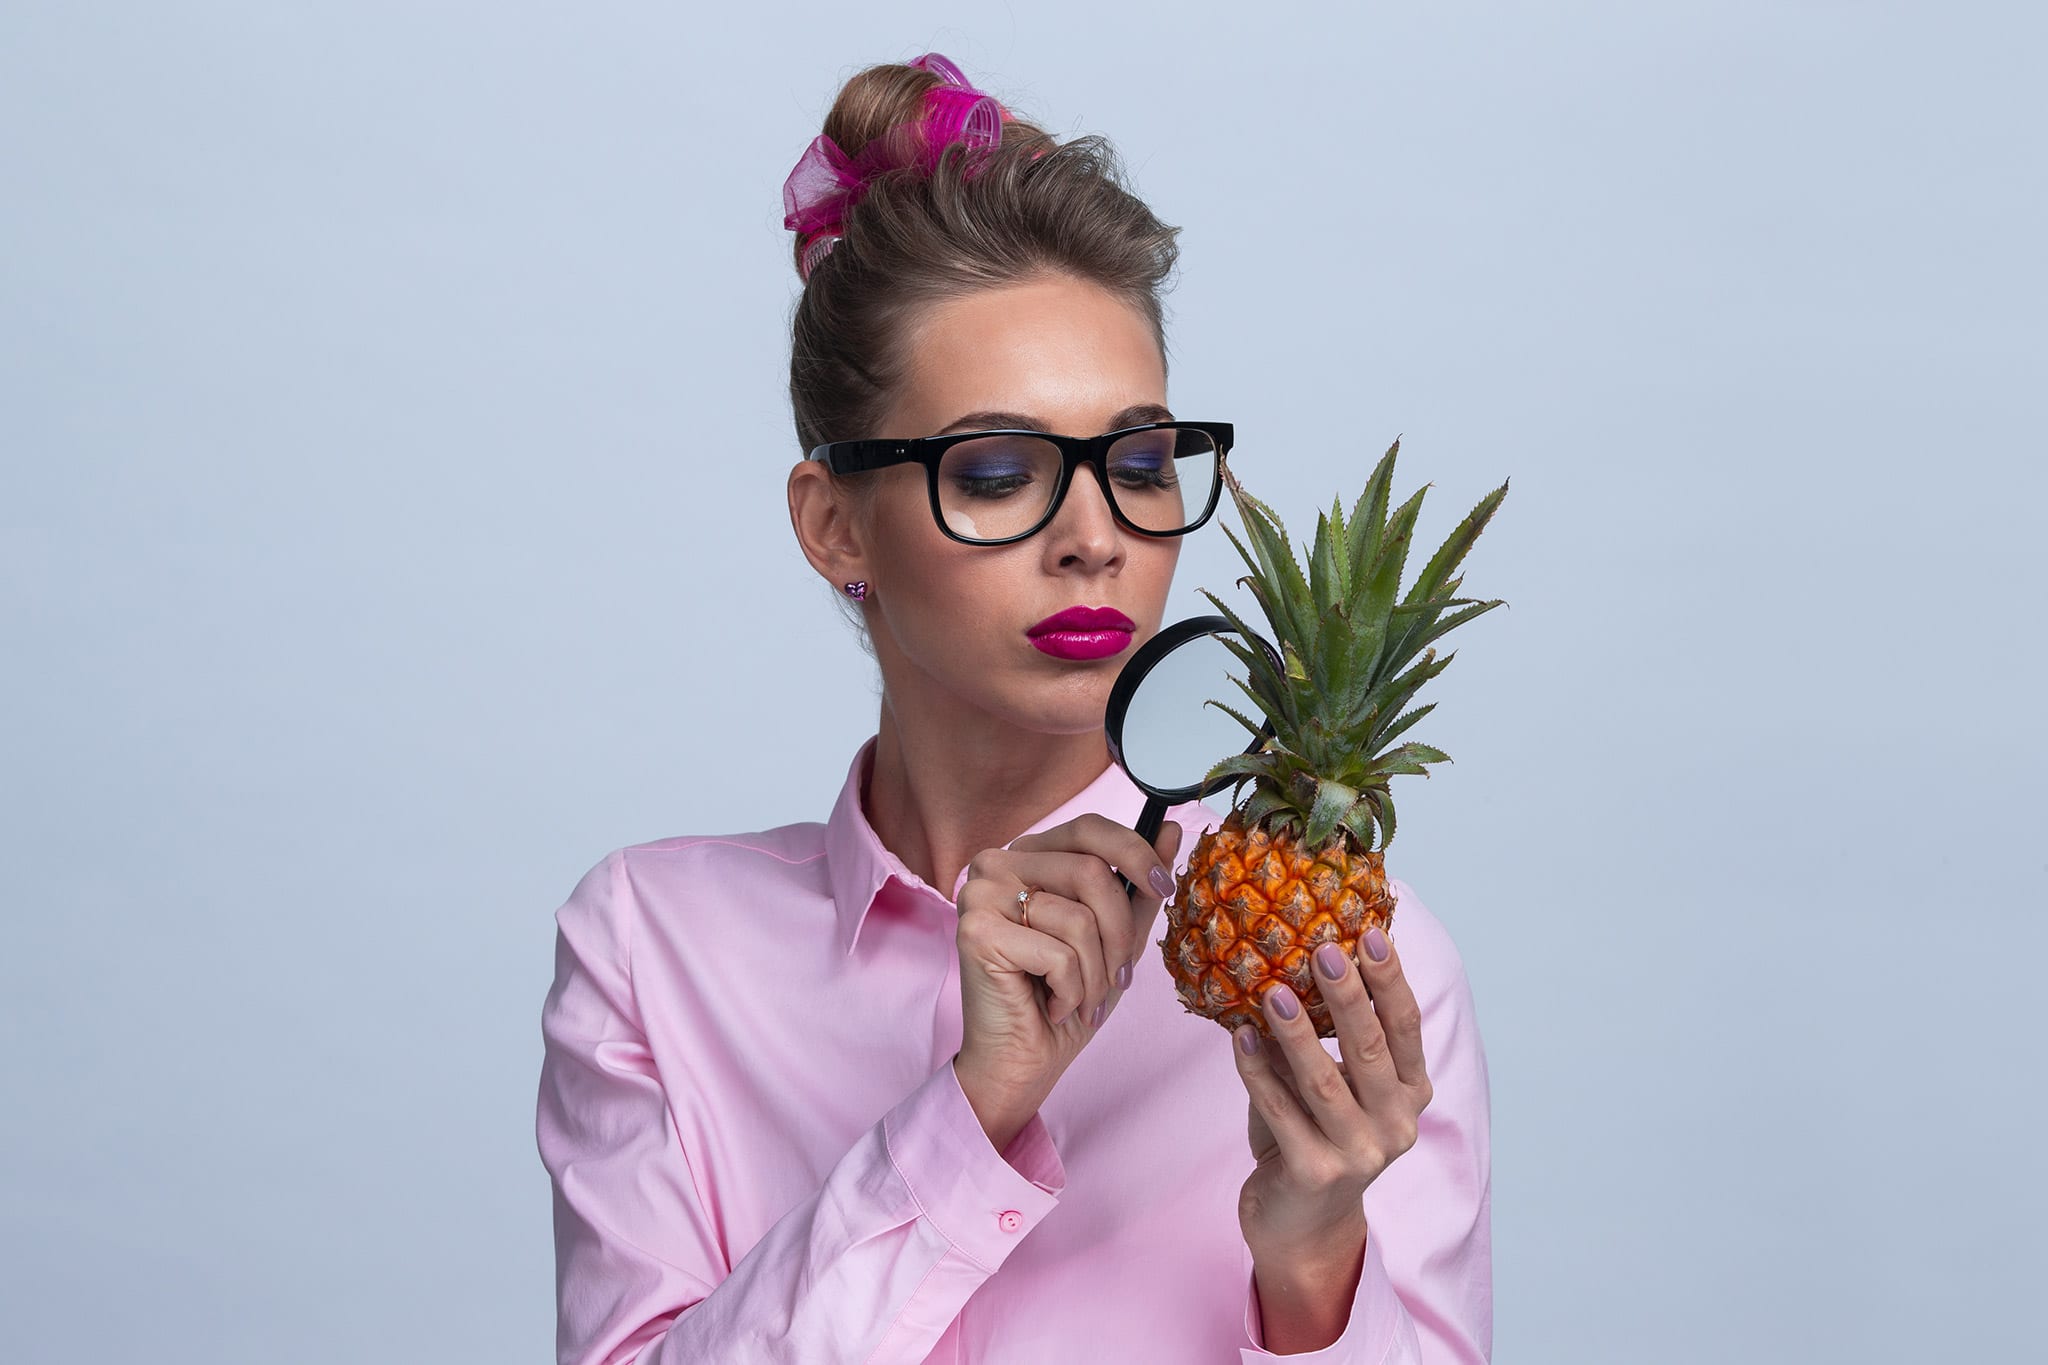 Woman inspecting a pineapple